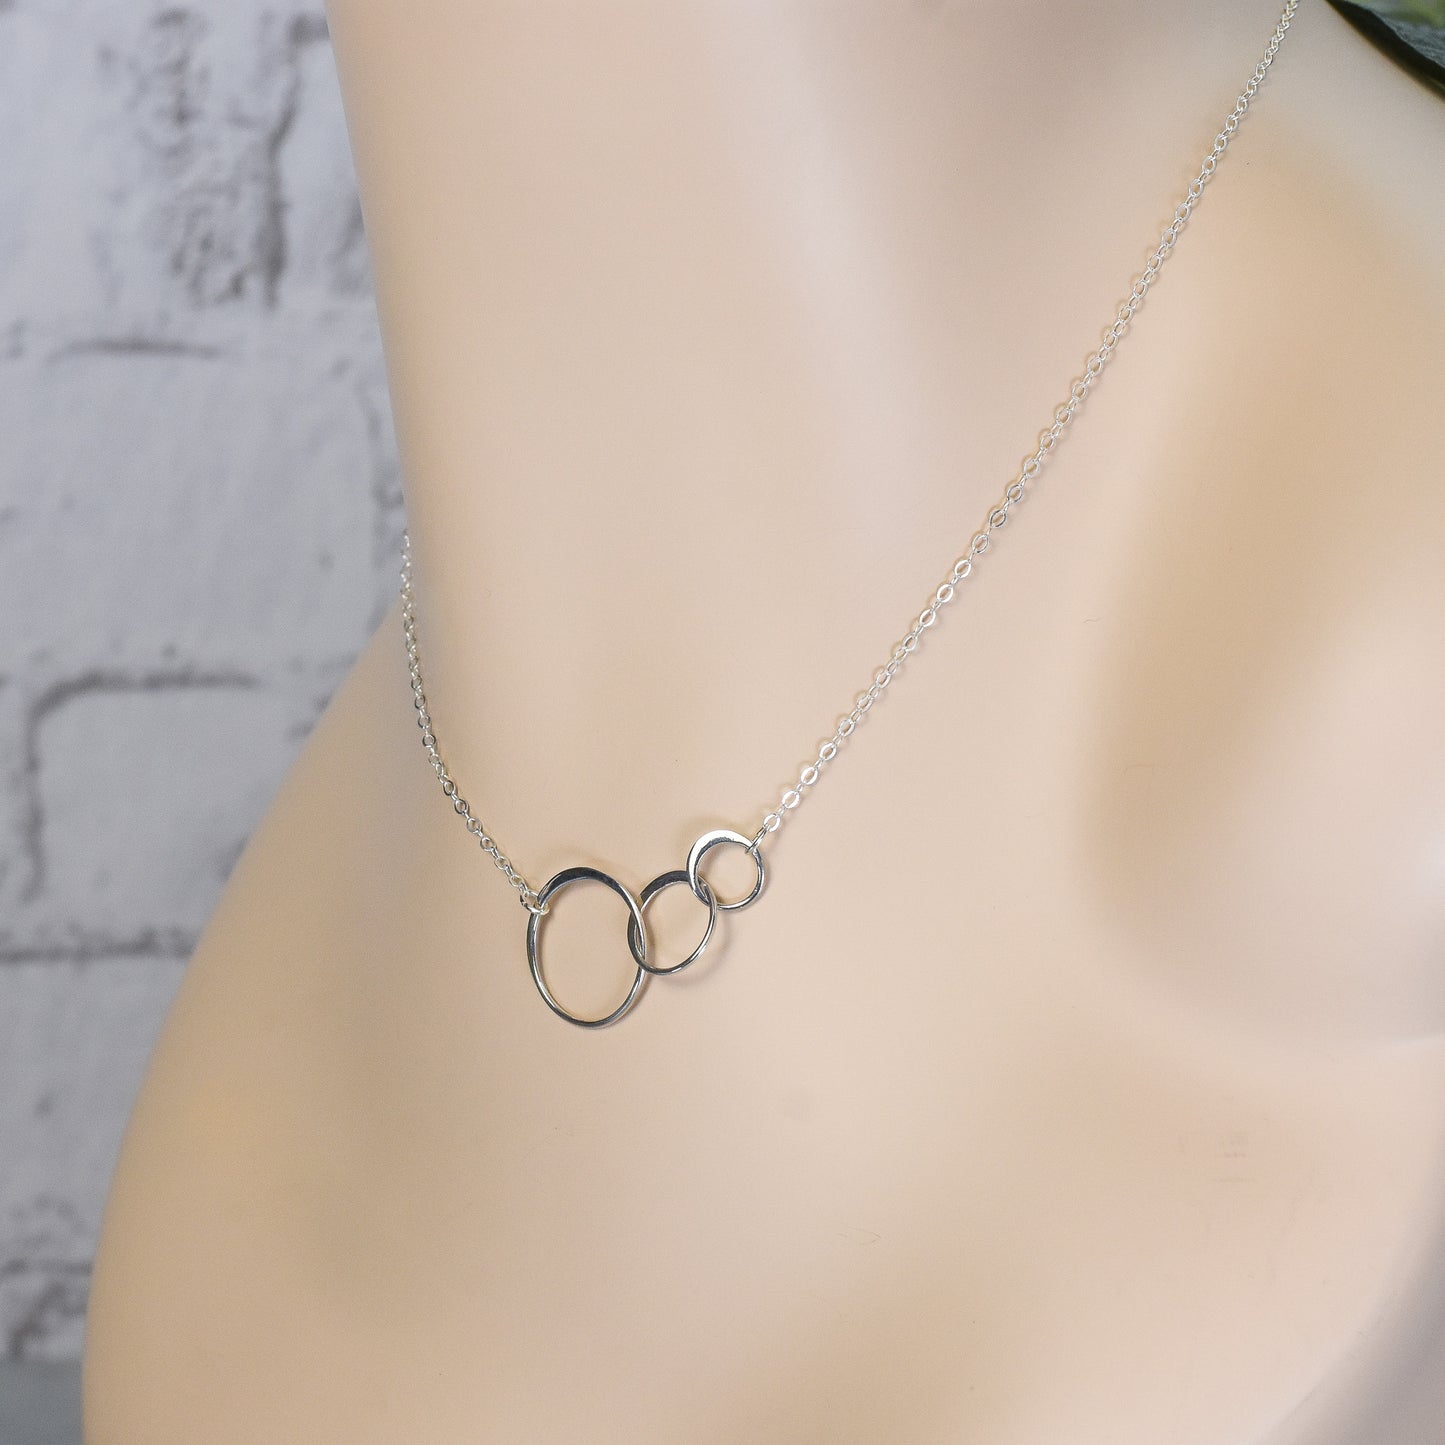 3 Circles of Life Necklace